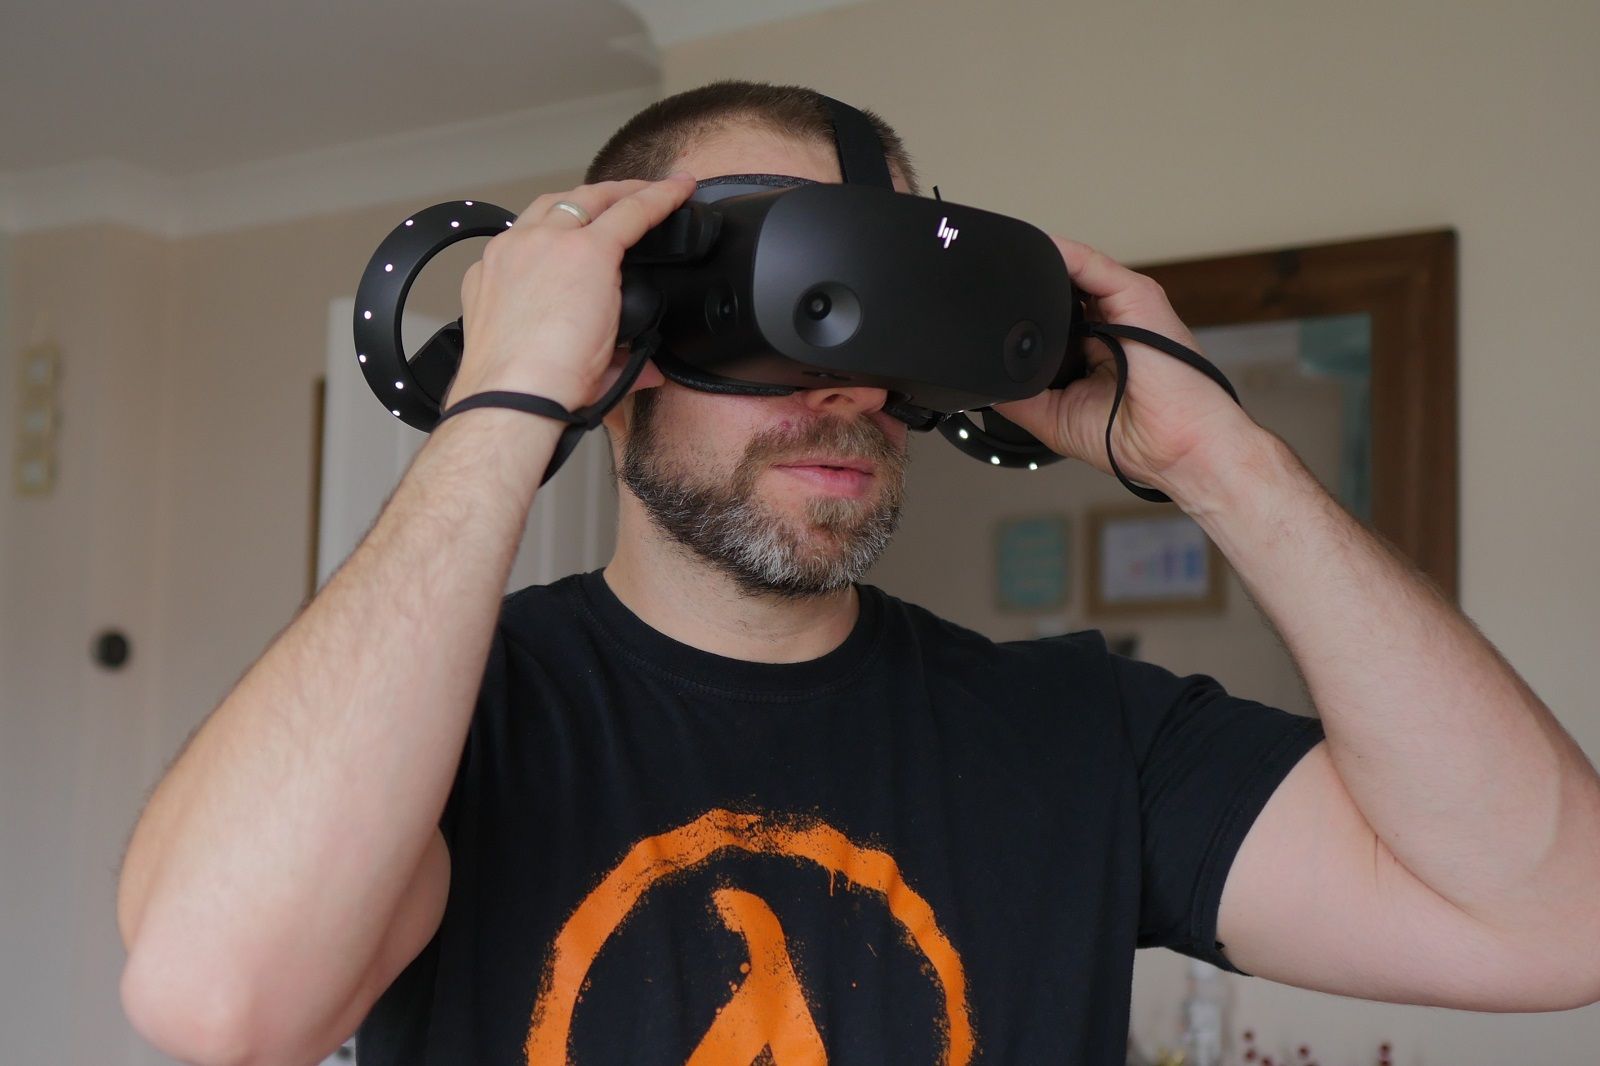 HP Reverb G2 VR headset review on head photo 3